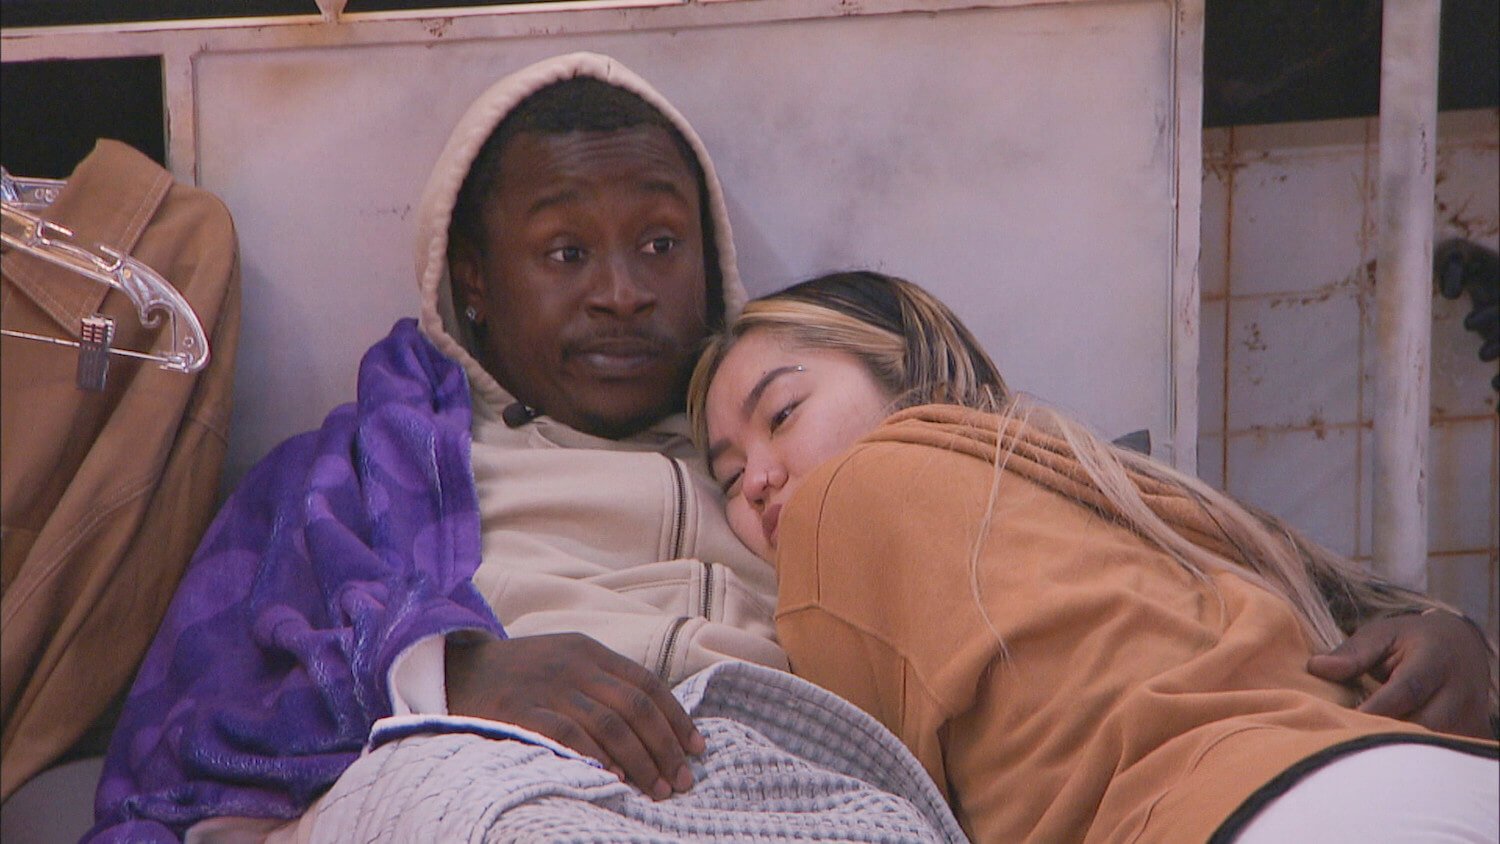 'Big Brother' Season 25 houseguests Jared Fields and Blue Kim cuddling